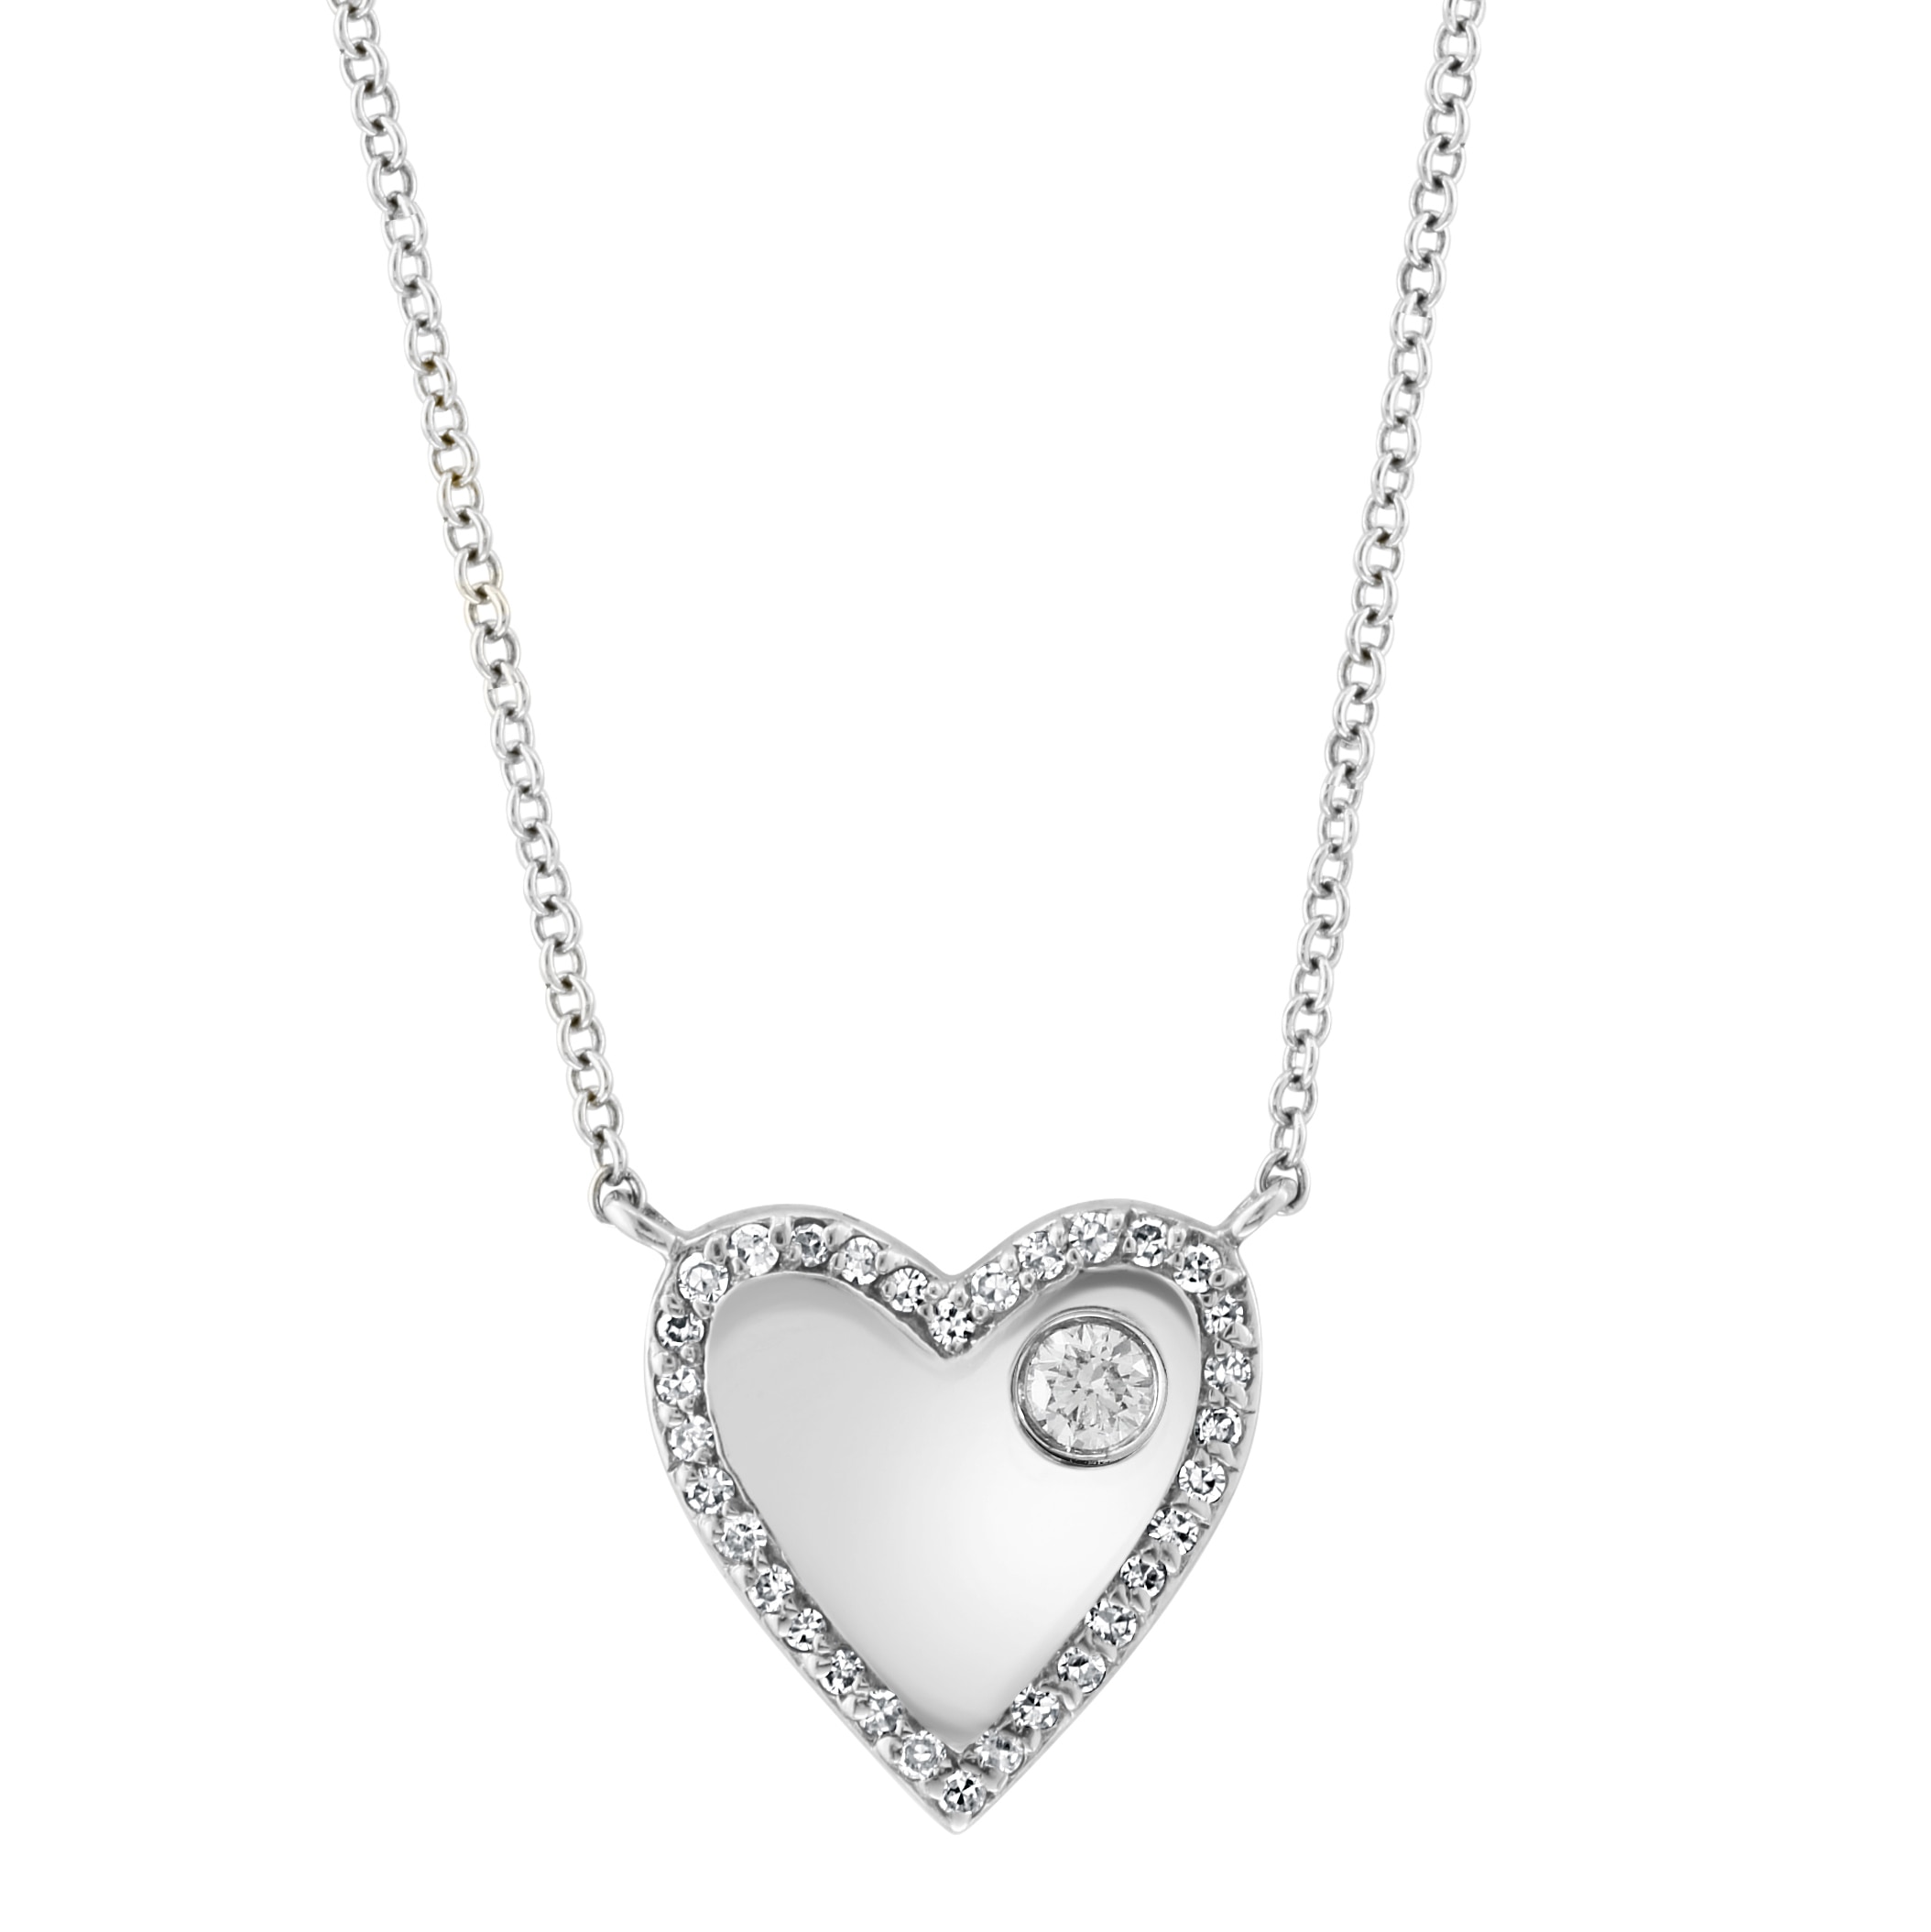 Jewellery - Necklaces & Pendants - Pendant Necklaces - EFFY Jewellery 14K  White Gold Diamond Heart Pendant and Chain - Online Shopping for Canadians